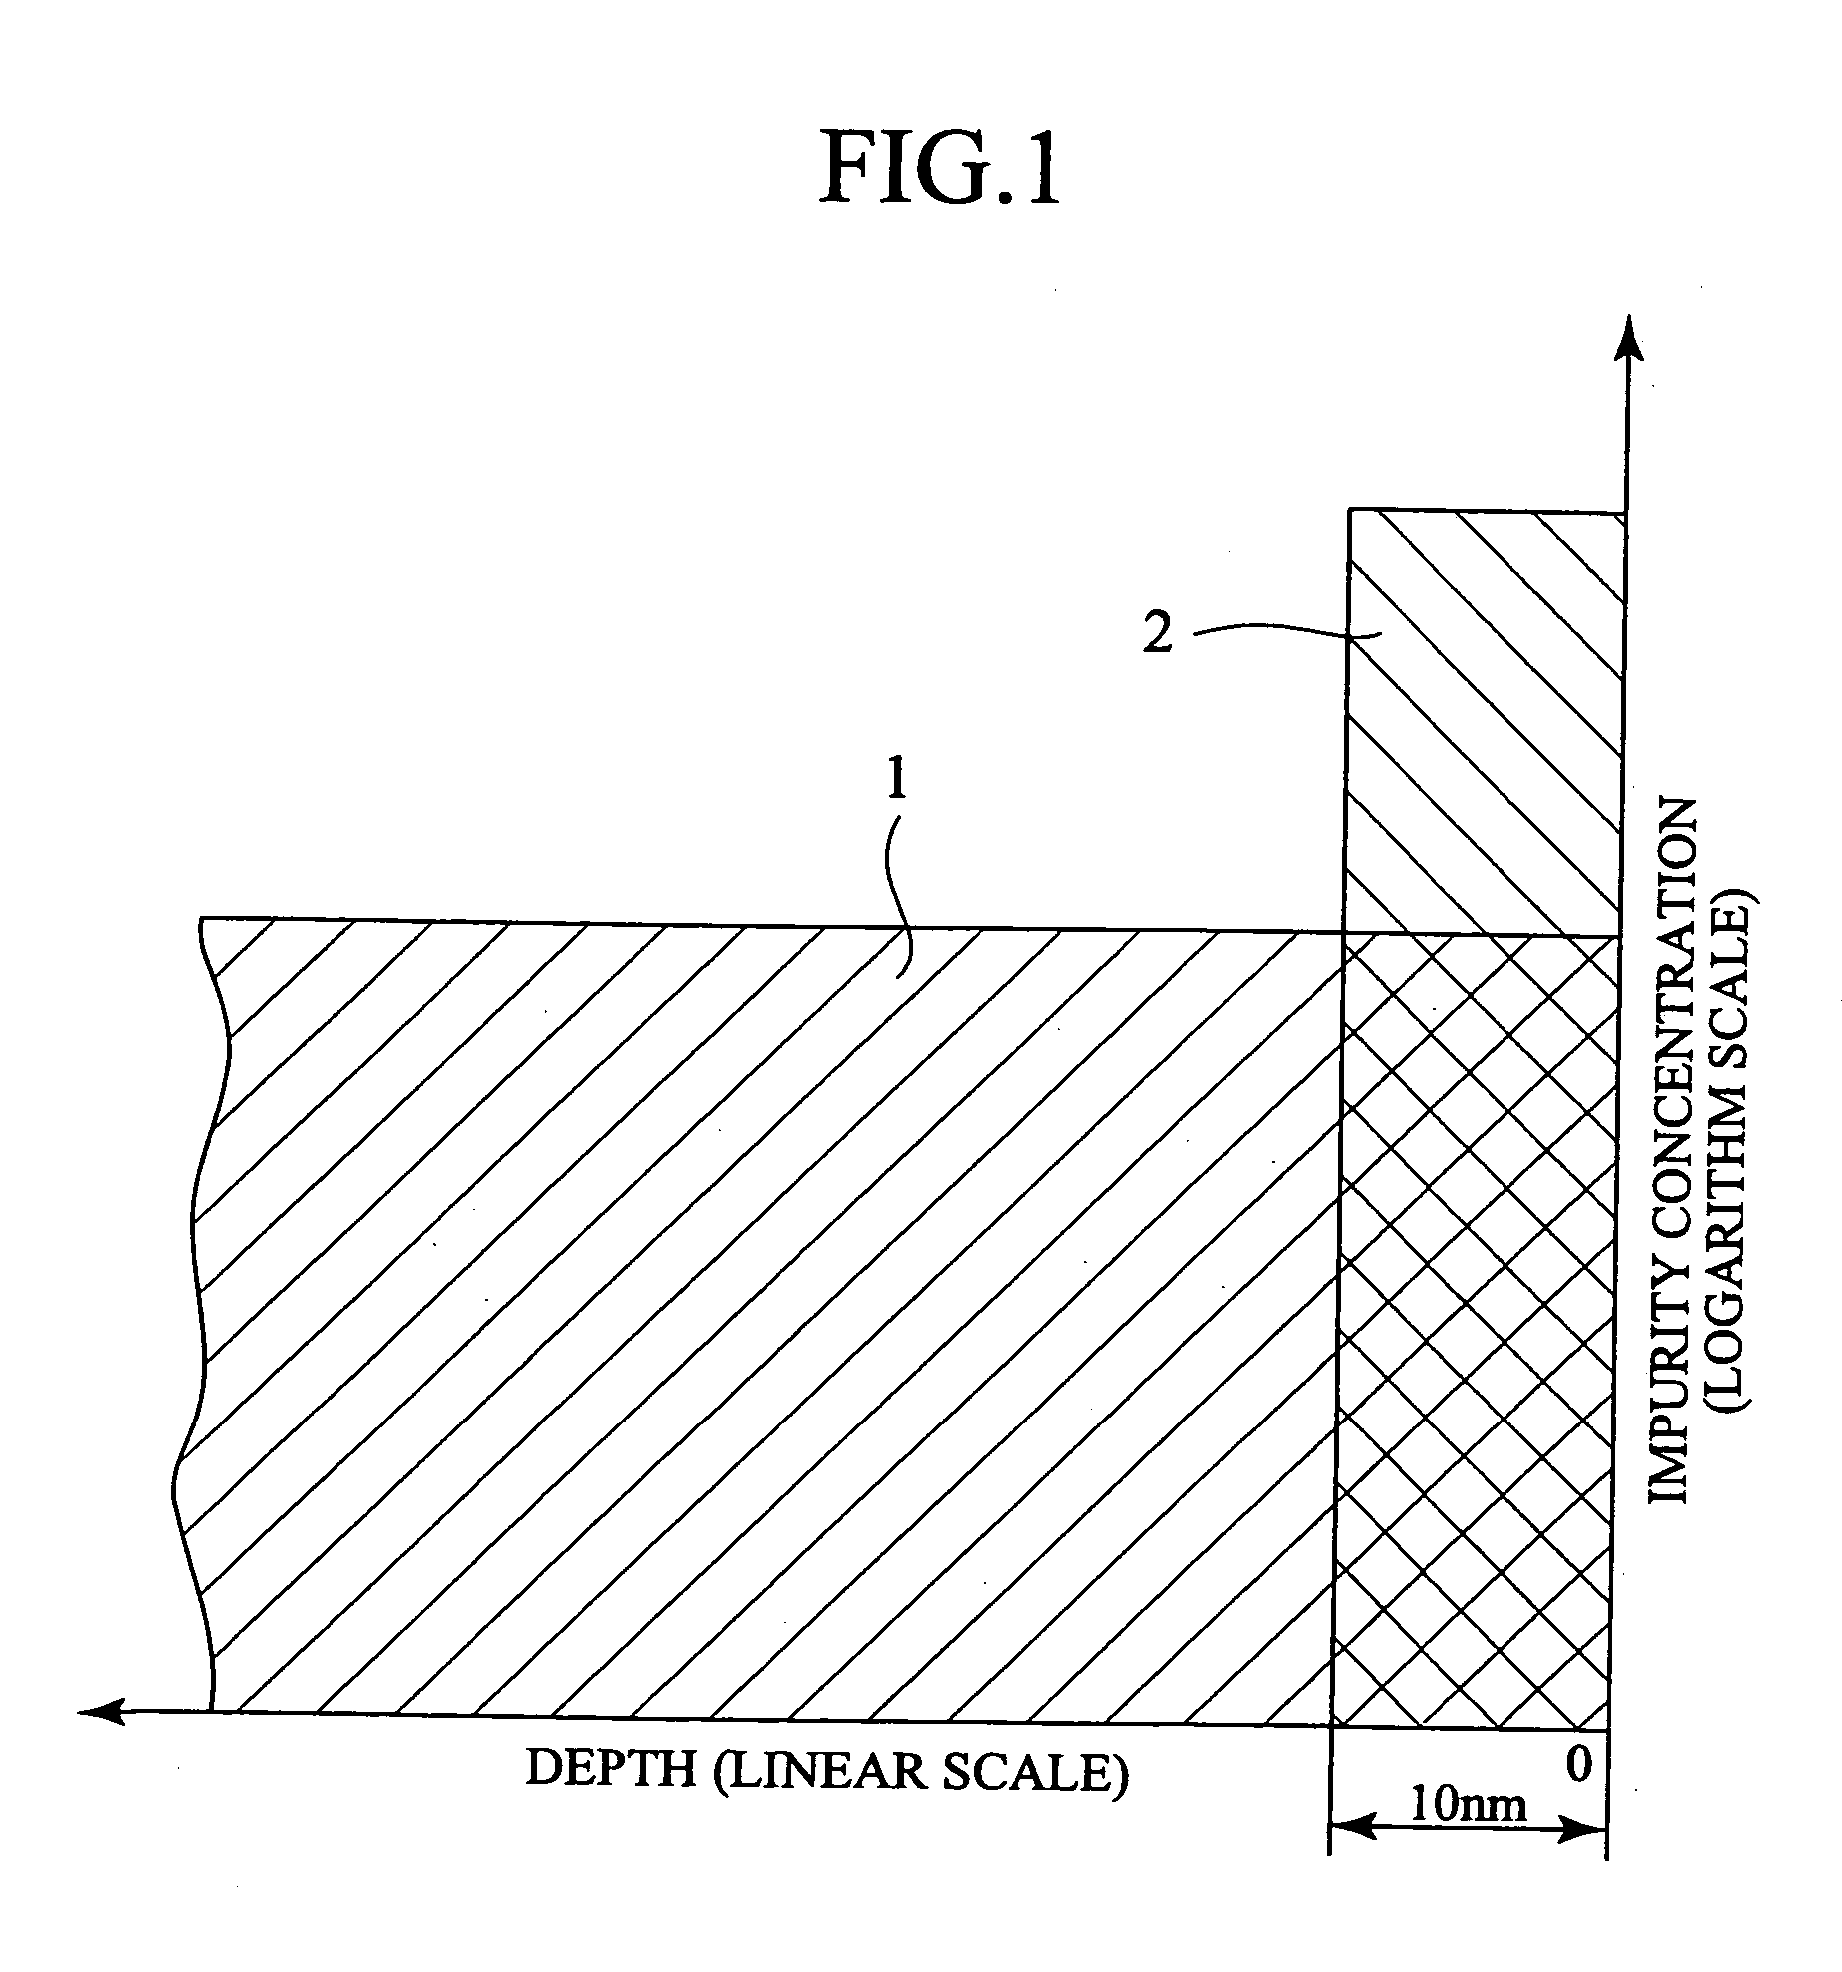 Low threshold voltage semiconductor device